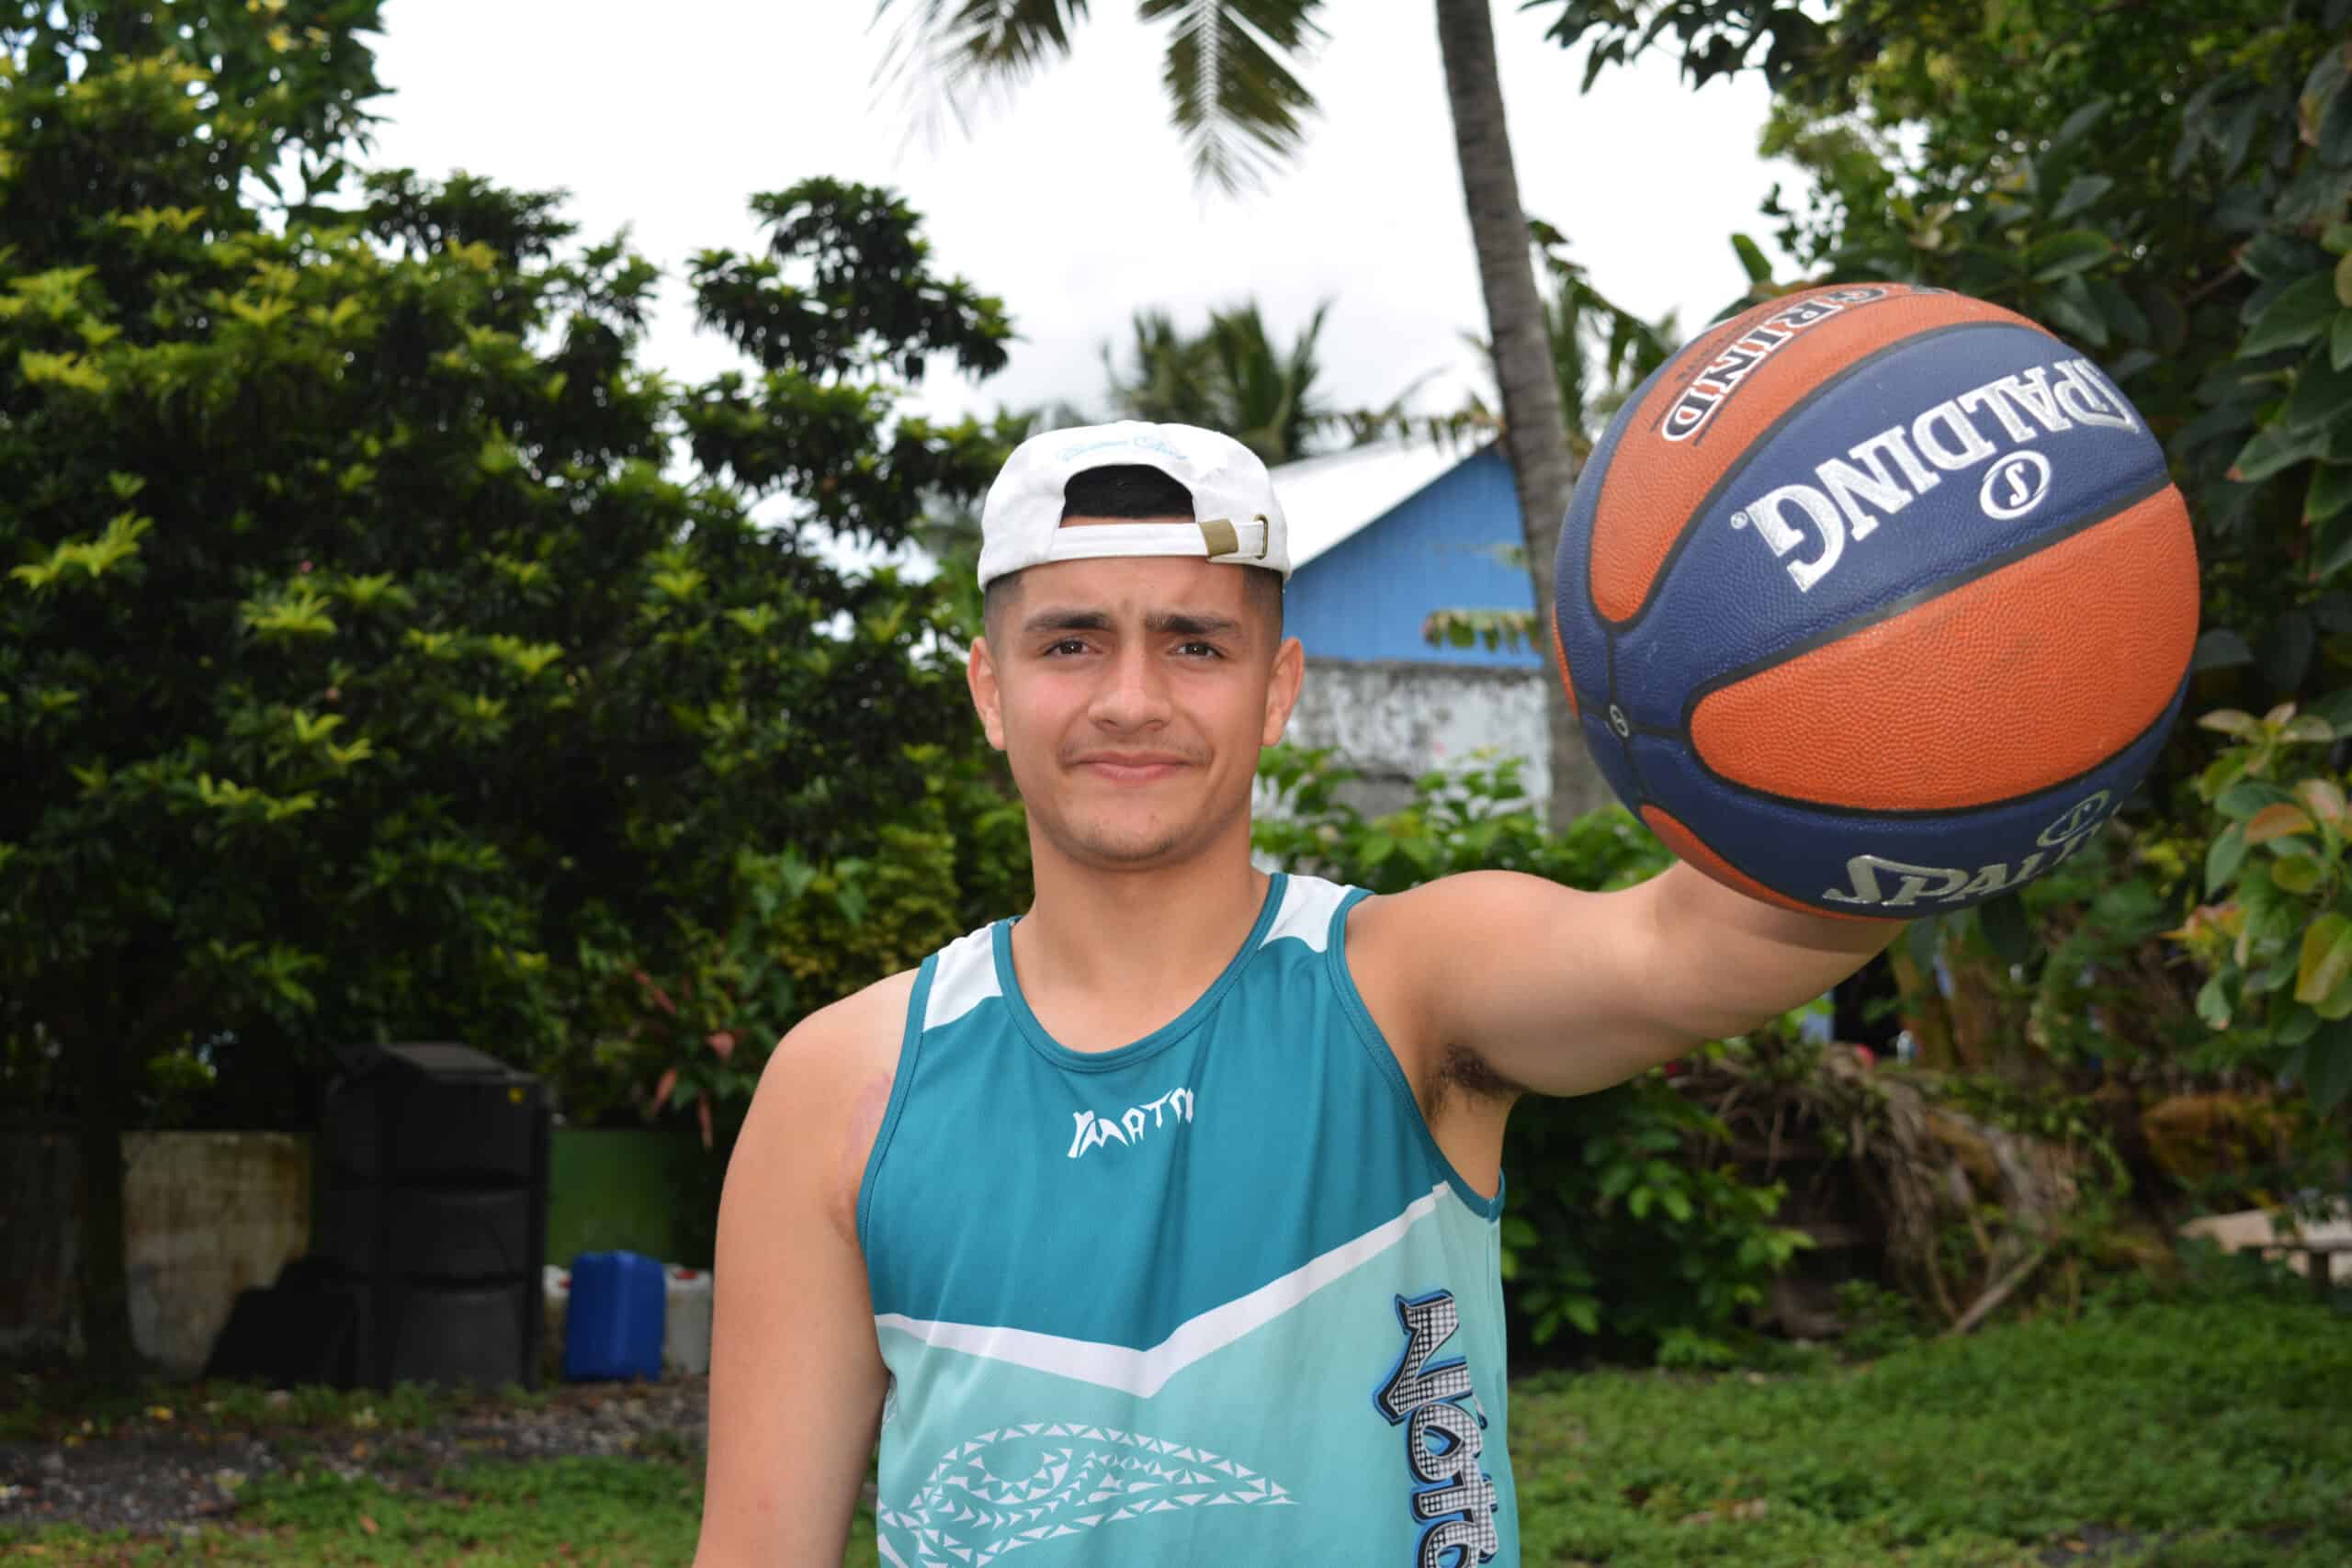 Young basketballer inspired to represent Cook Islands